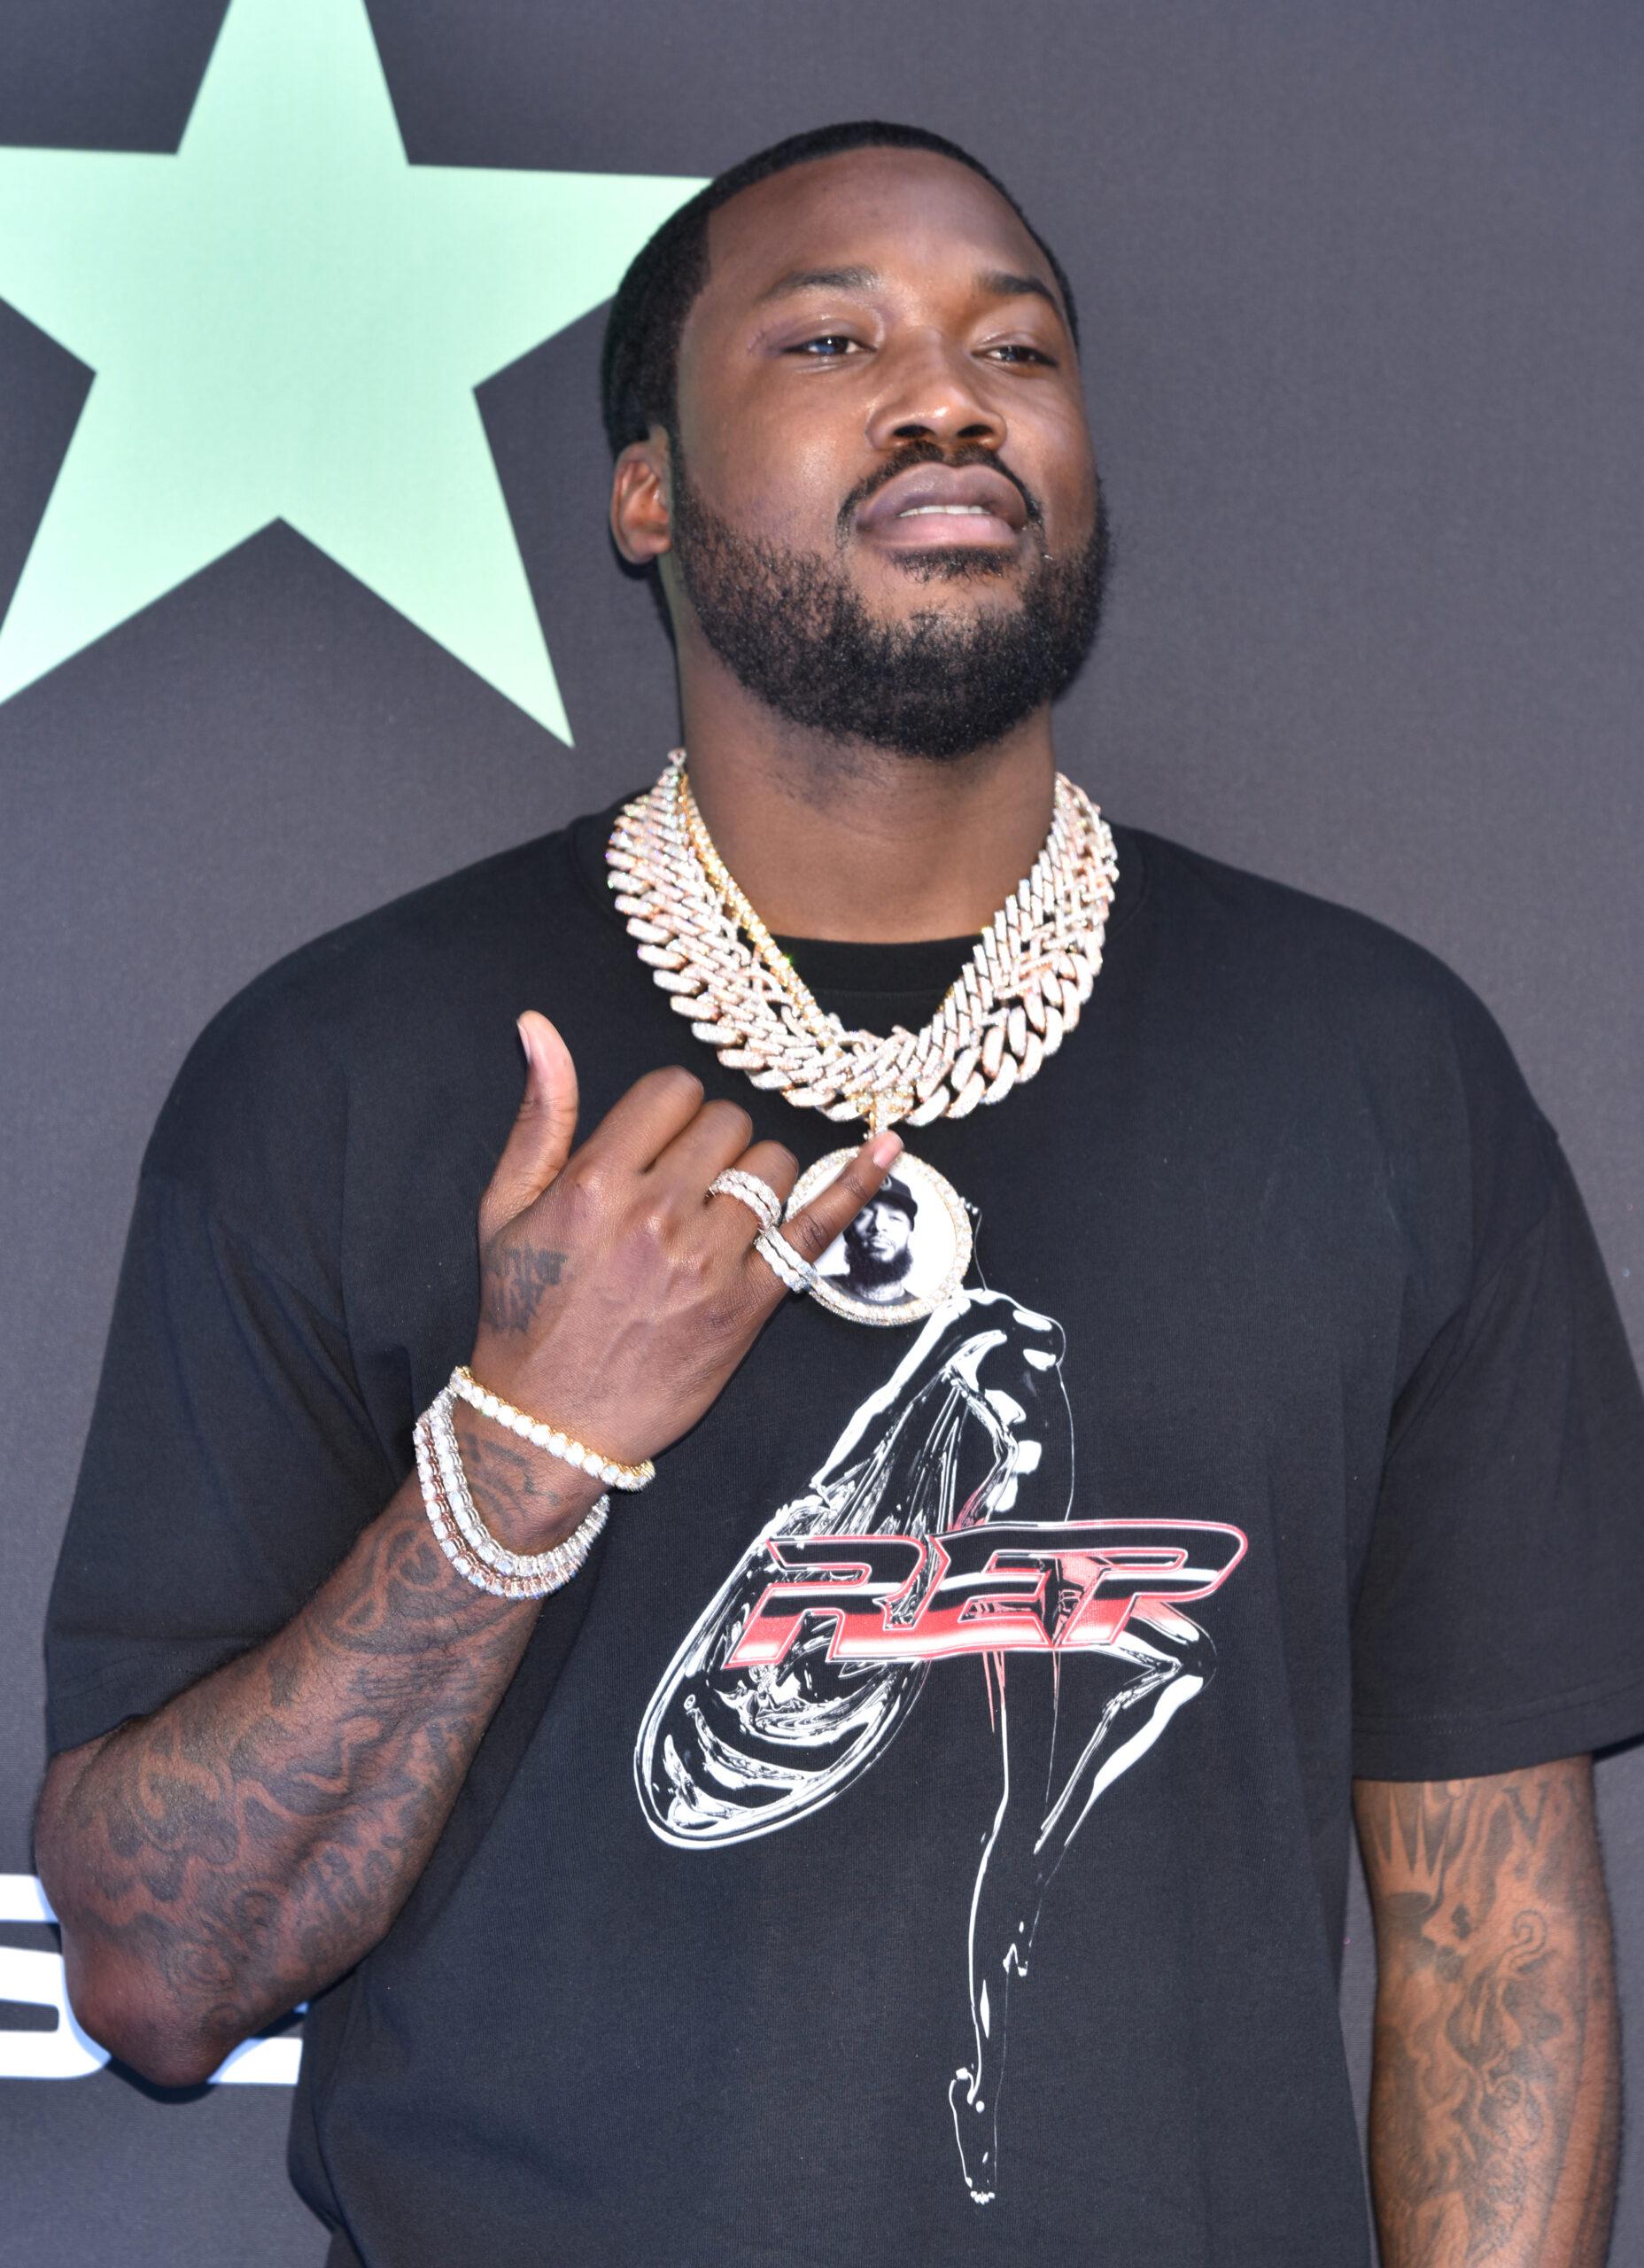 Meek Mill attends the 19th annual BET Awards in Los Angeles